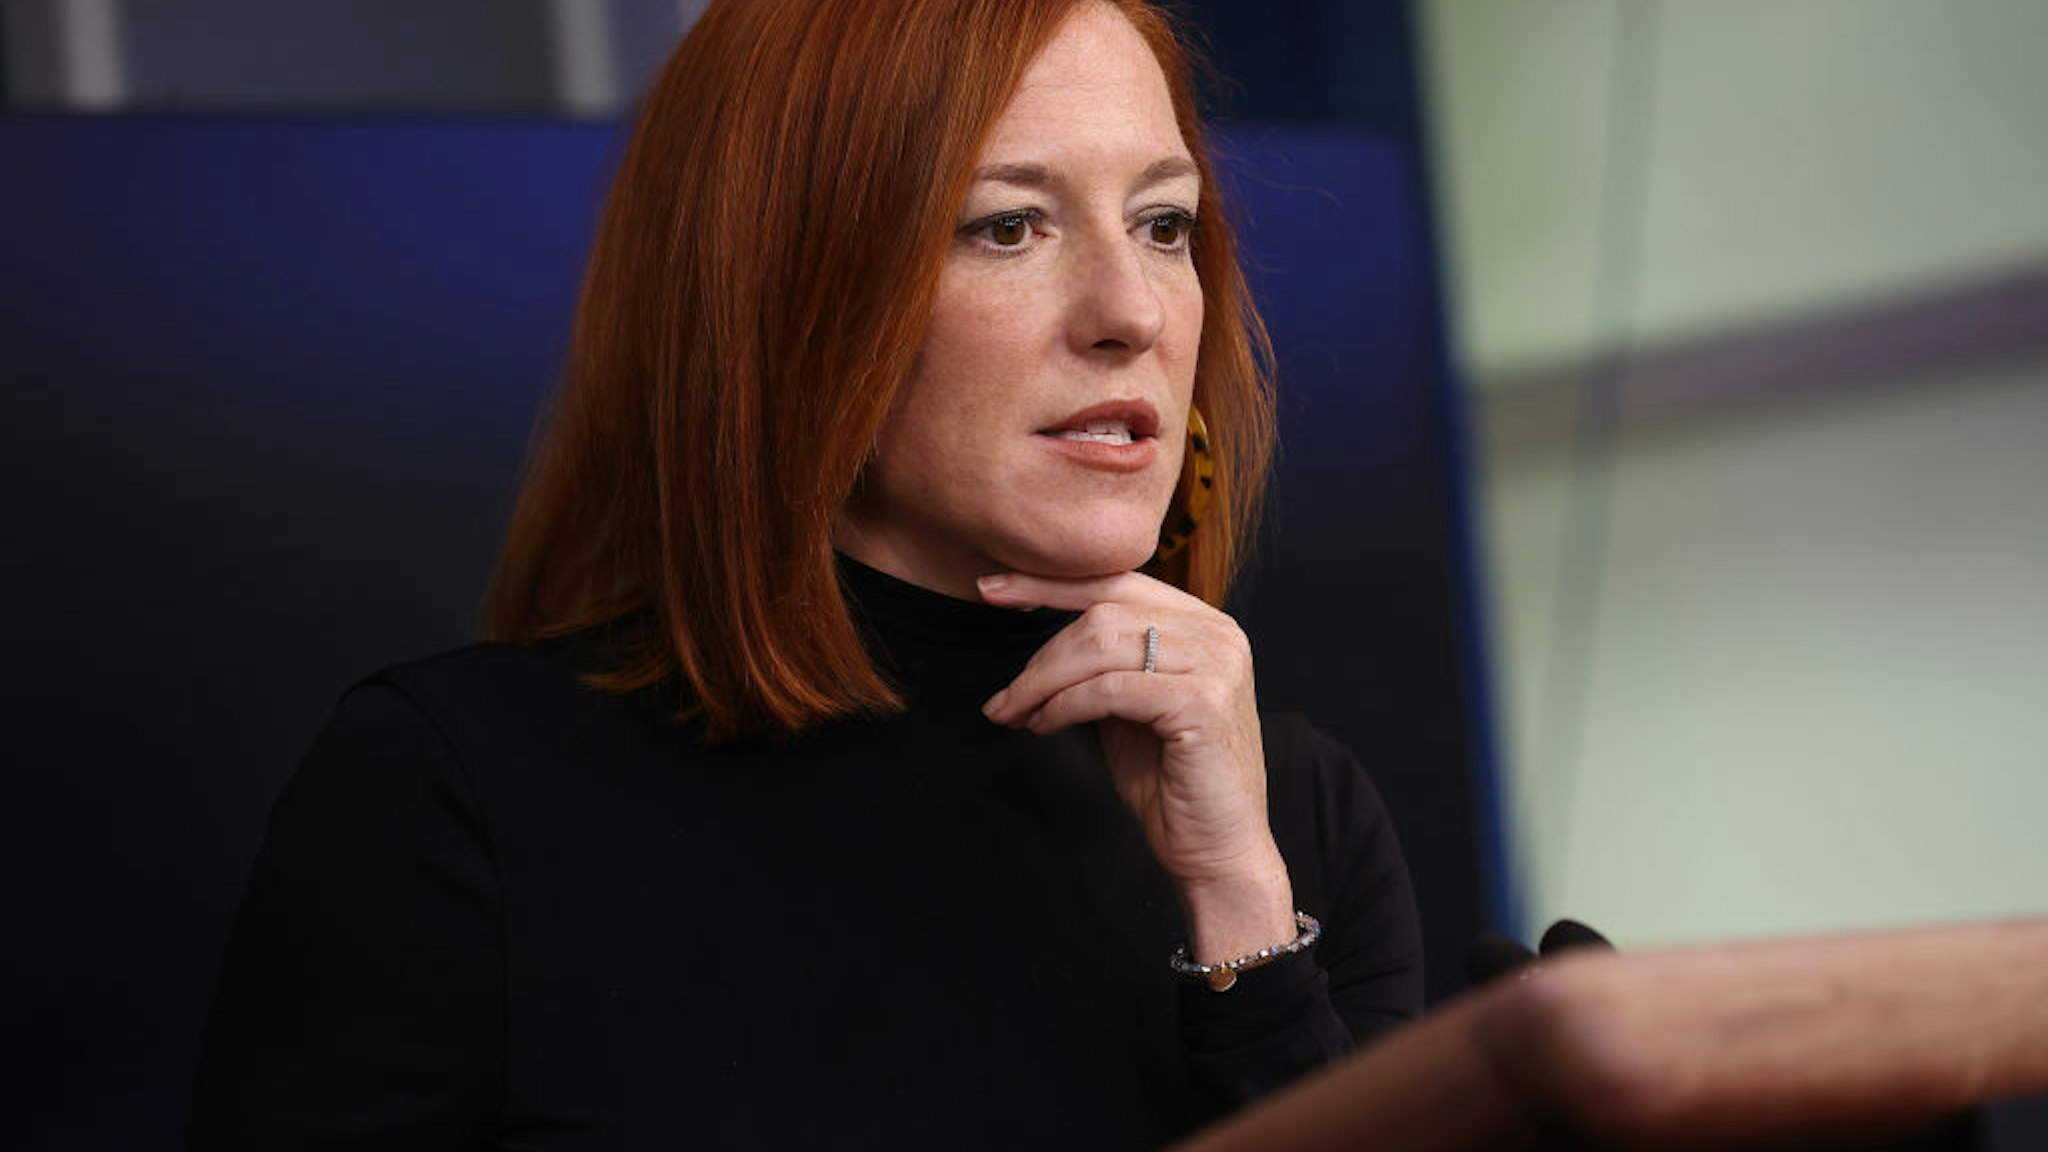 White House Press Secretary Jen Psaki talks to reporters during a news conference in the Brady Press Briefing Room at the White House on February 03, 2021 in Washington, DC.